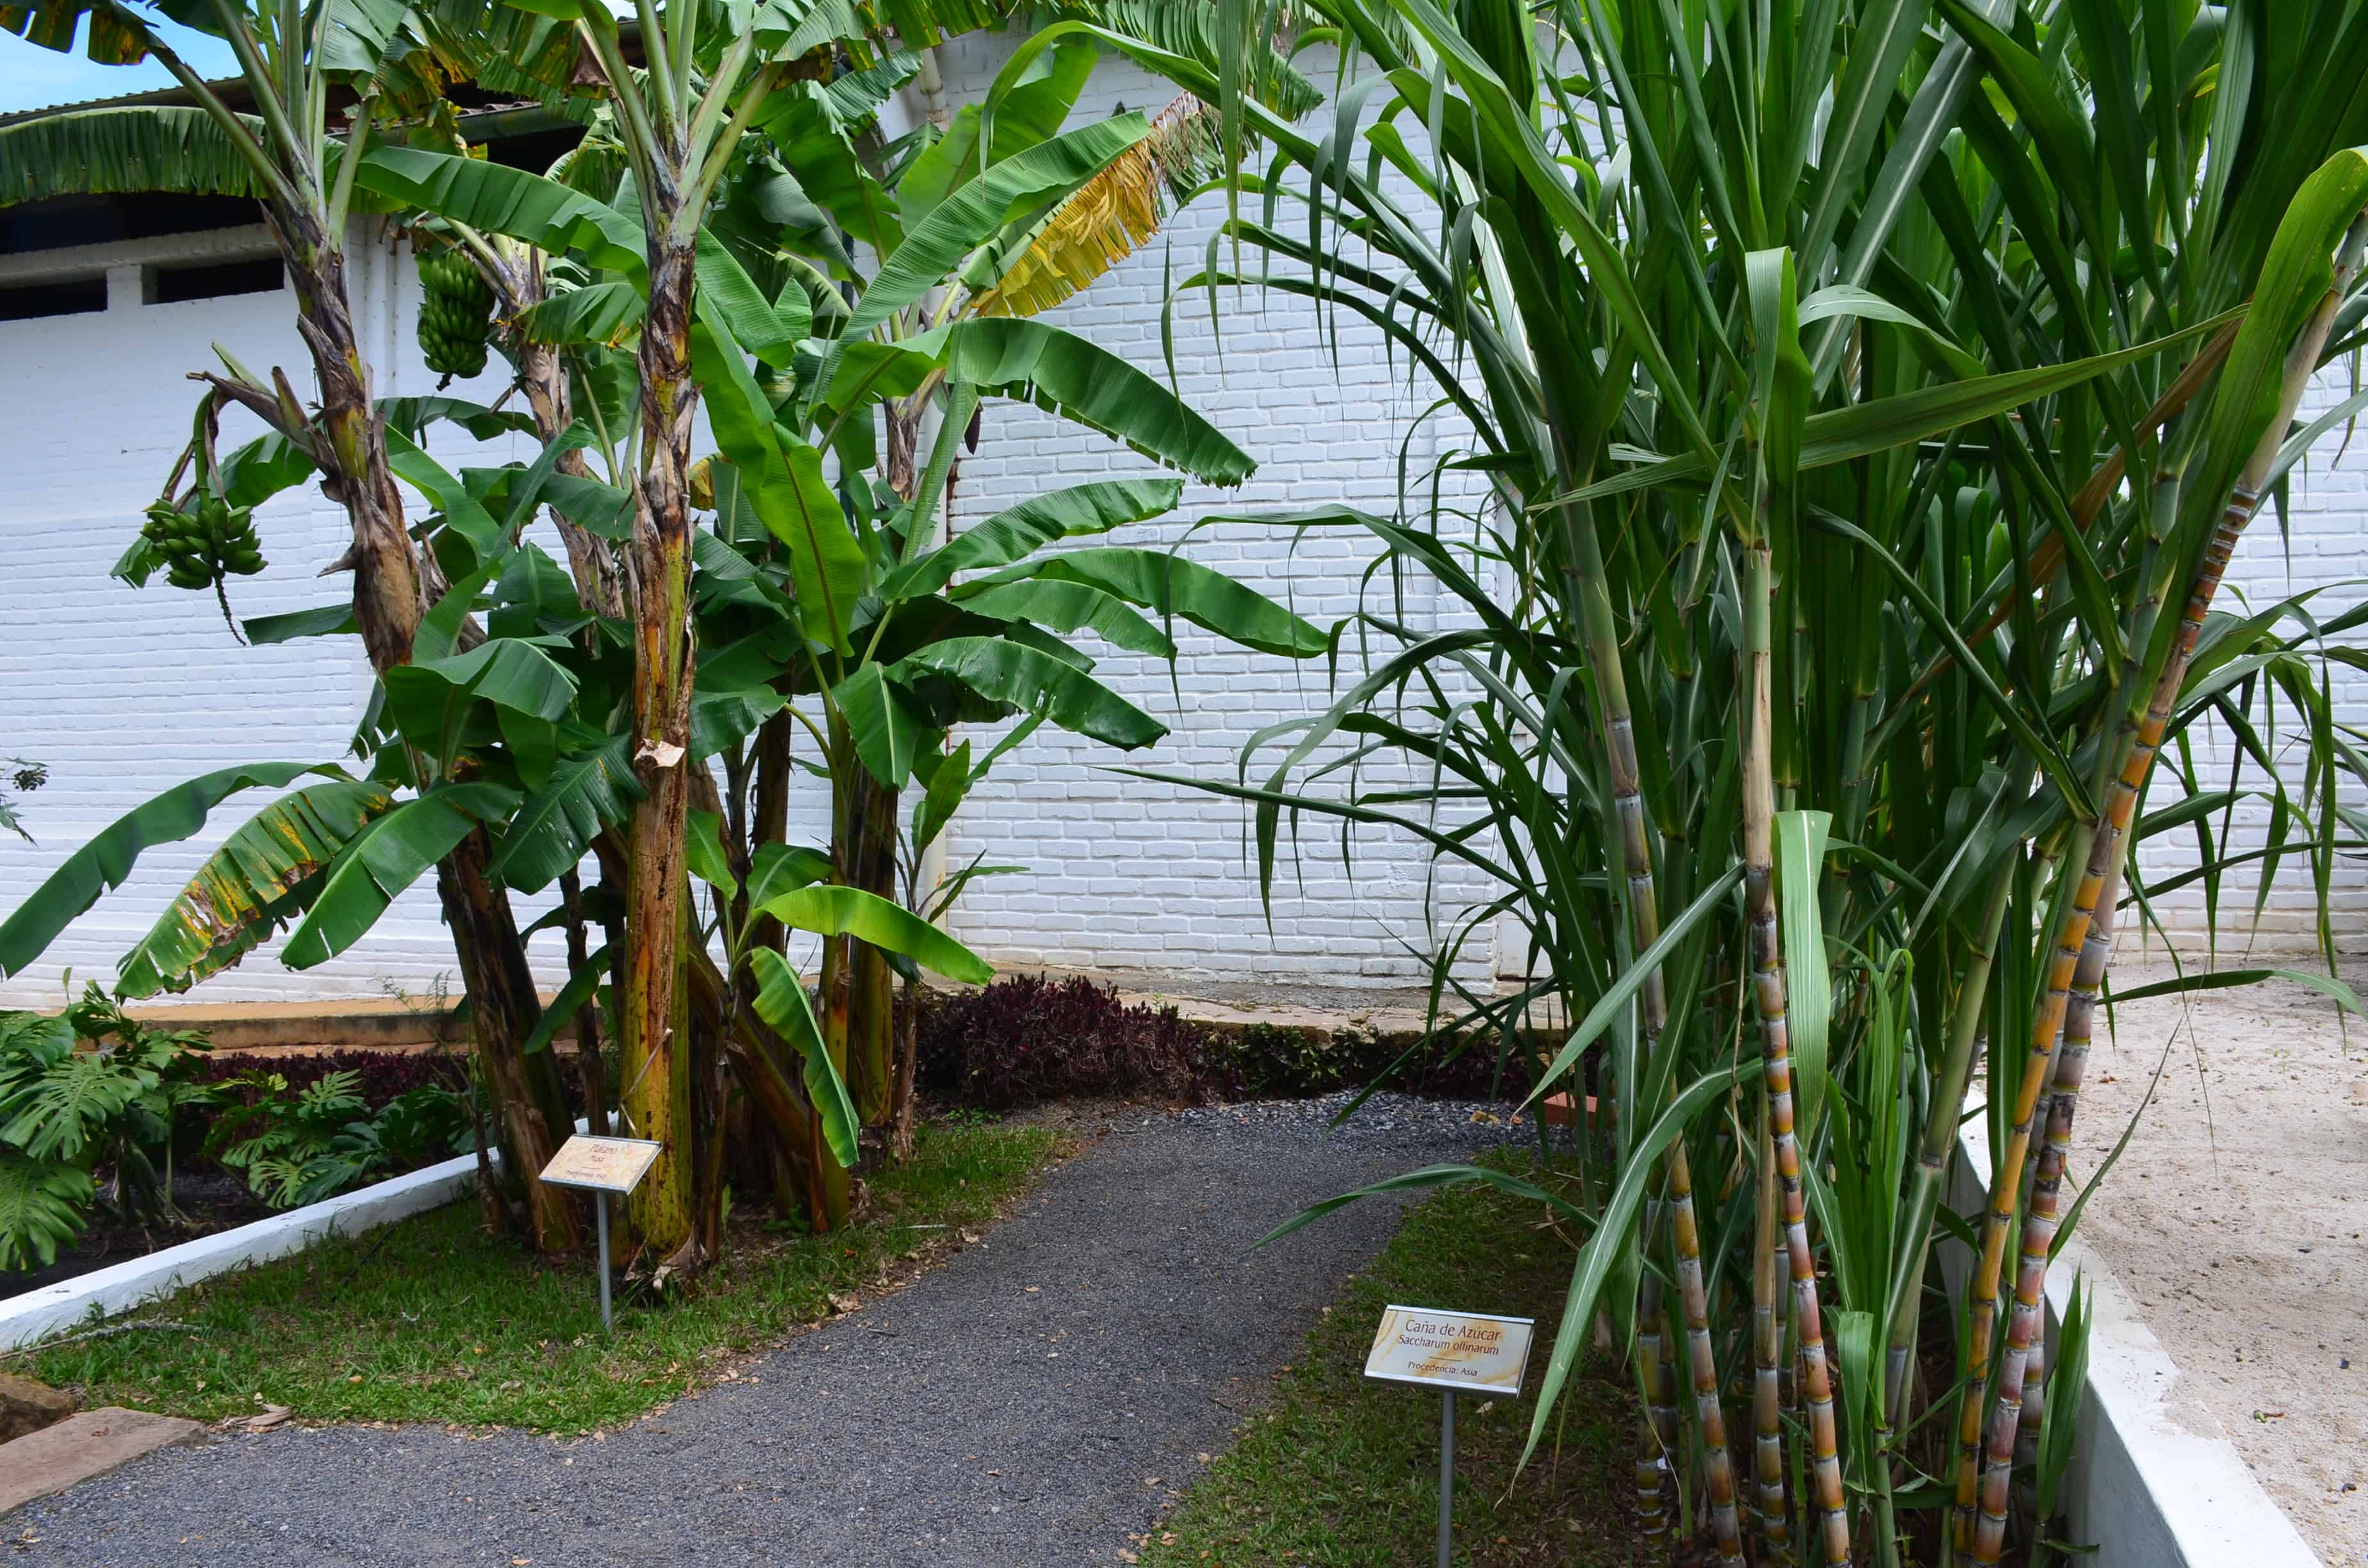 Plantain (left) and sugarcane (right) at the Barichara Paper Workshop in Barichara, Santander, Colombia